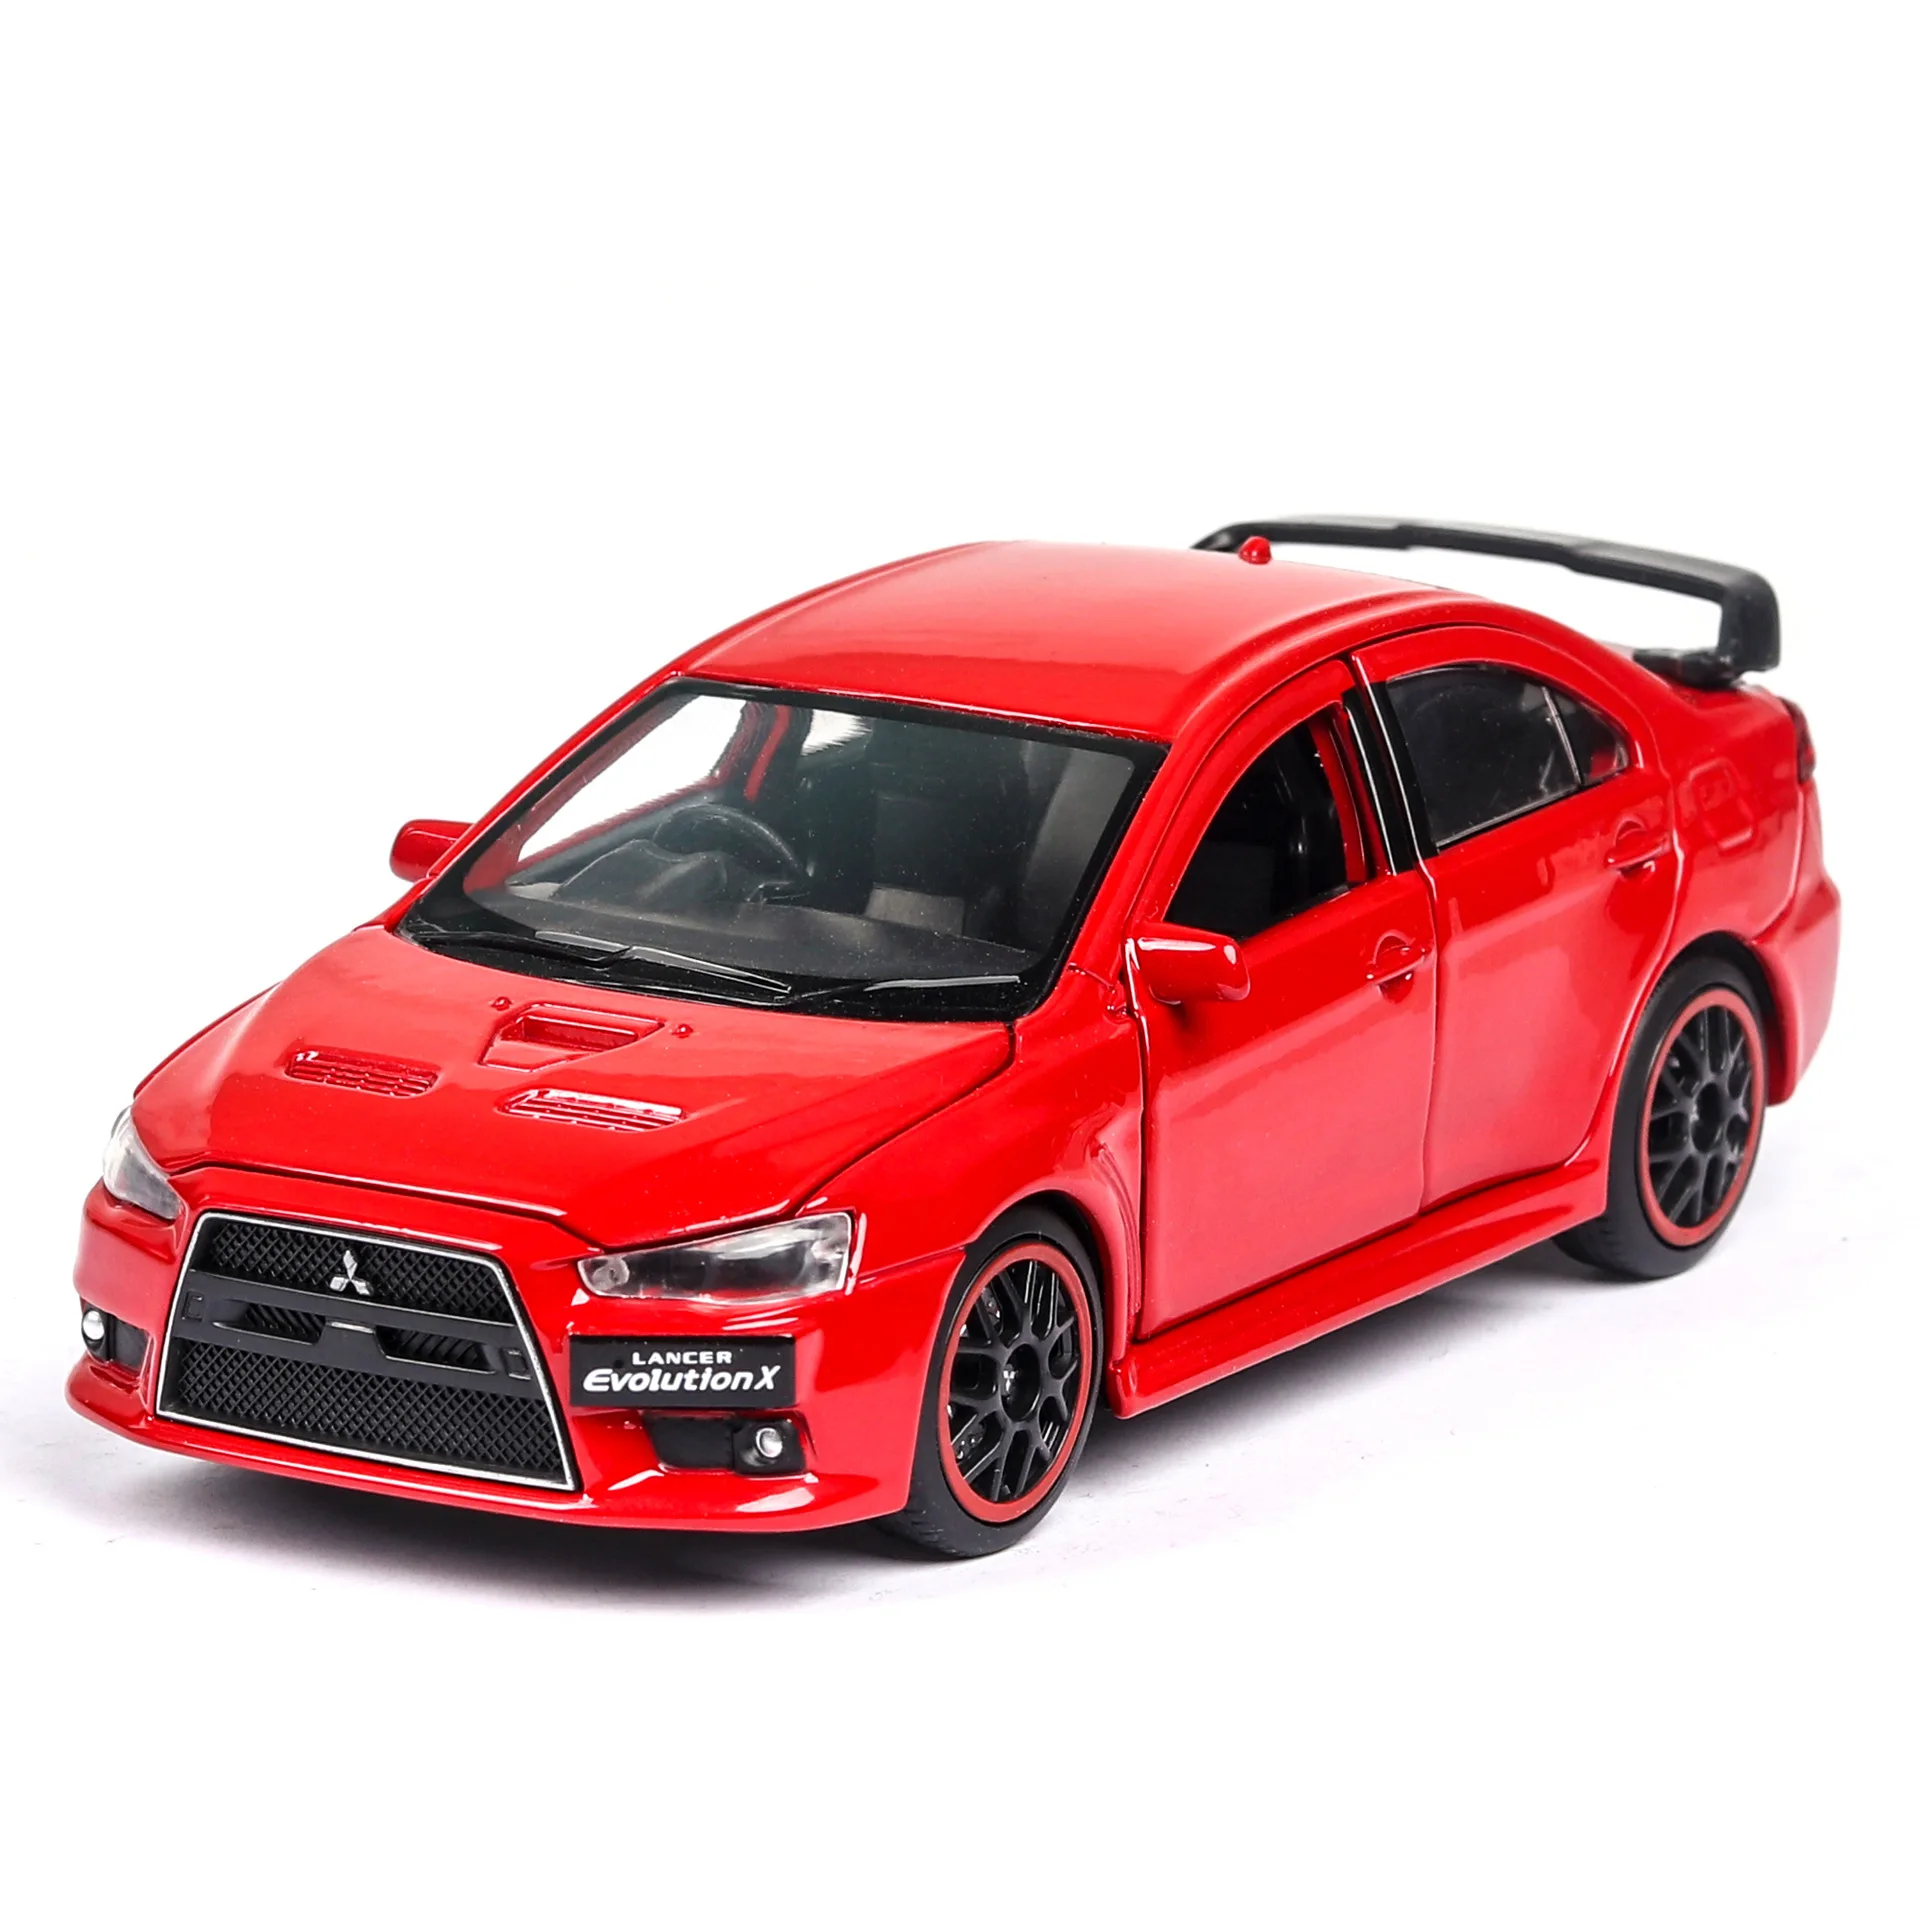 1:32 Diecast Toy Car Model Red Metal Sports Car Pull Back Car Open Door With Sound And Light Flash Collection Decoration Gift